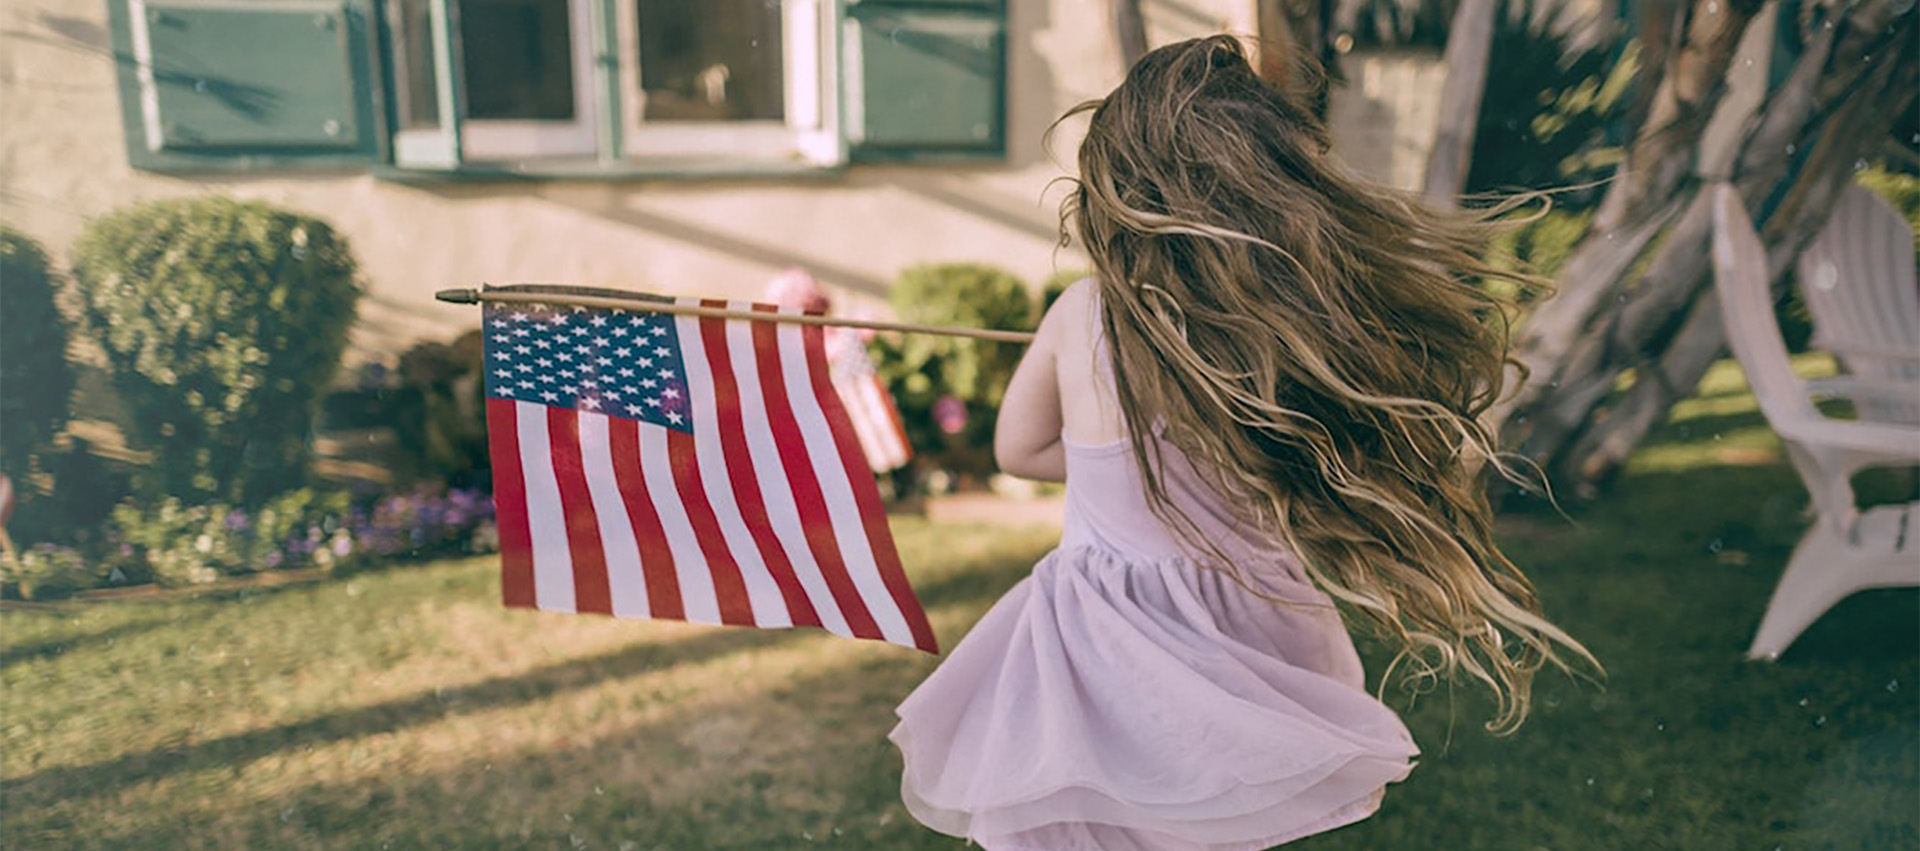 image of a little girl with an American flag